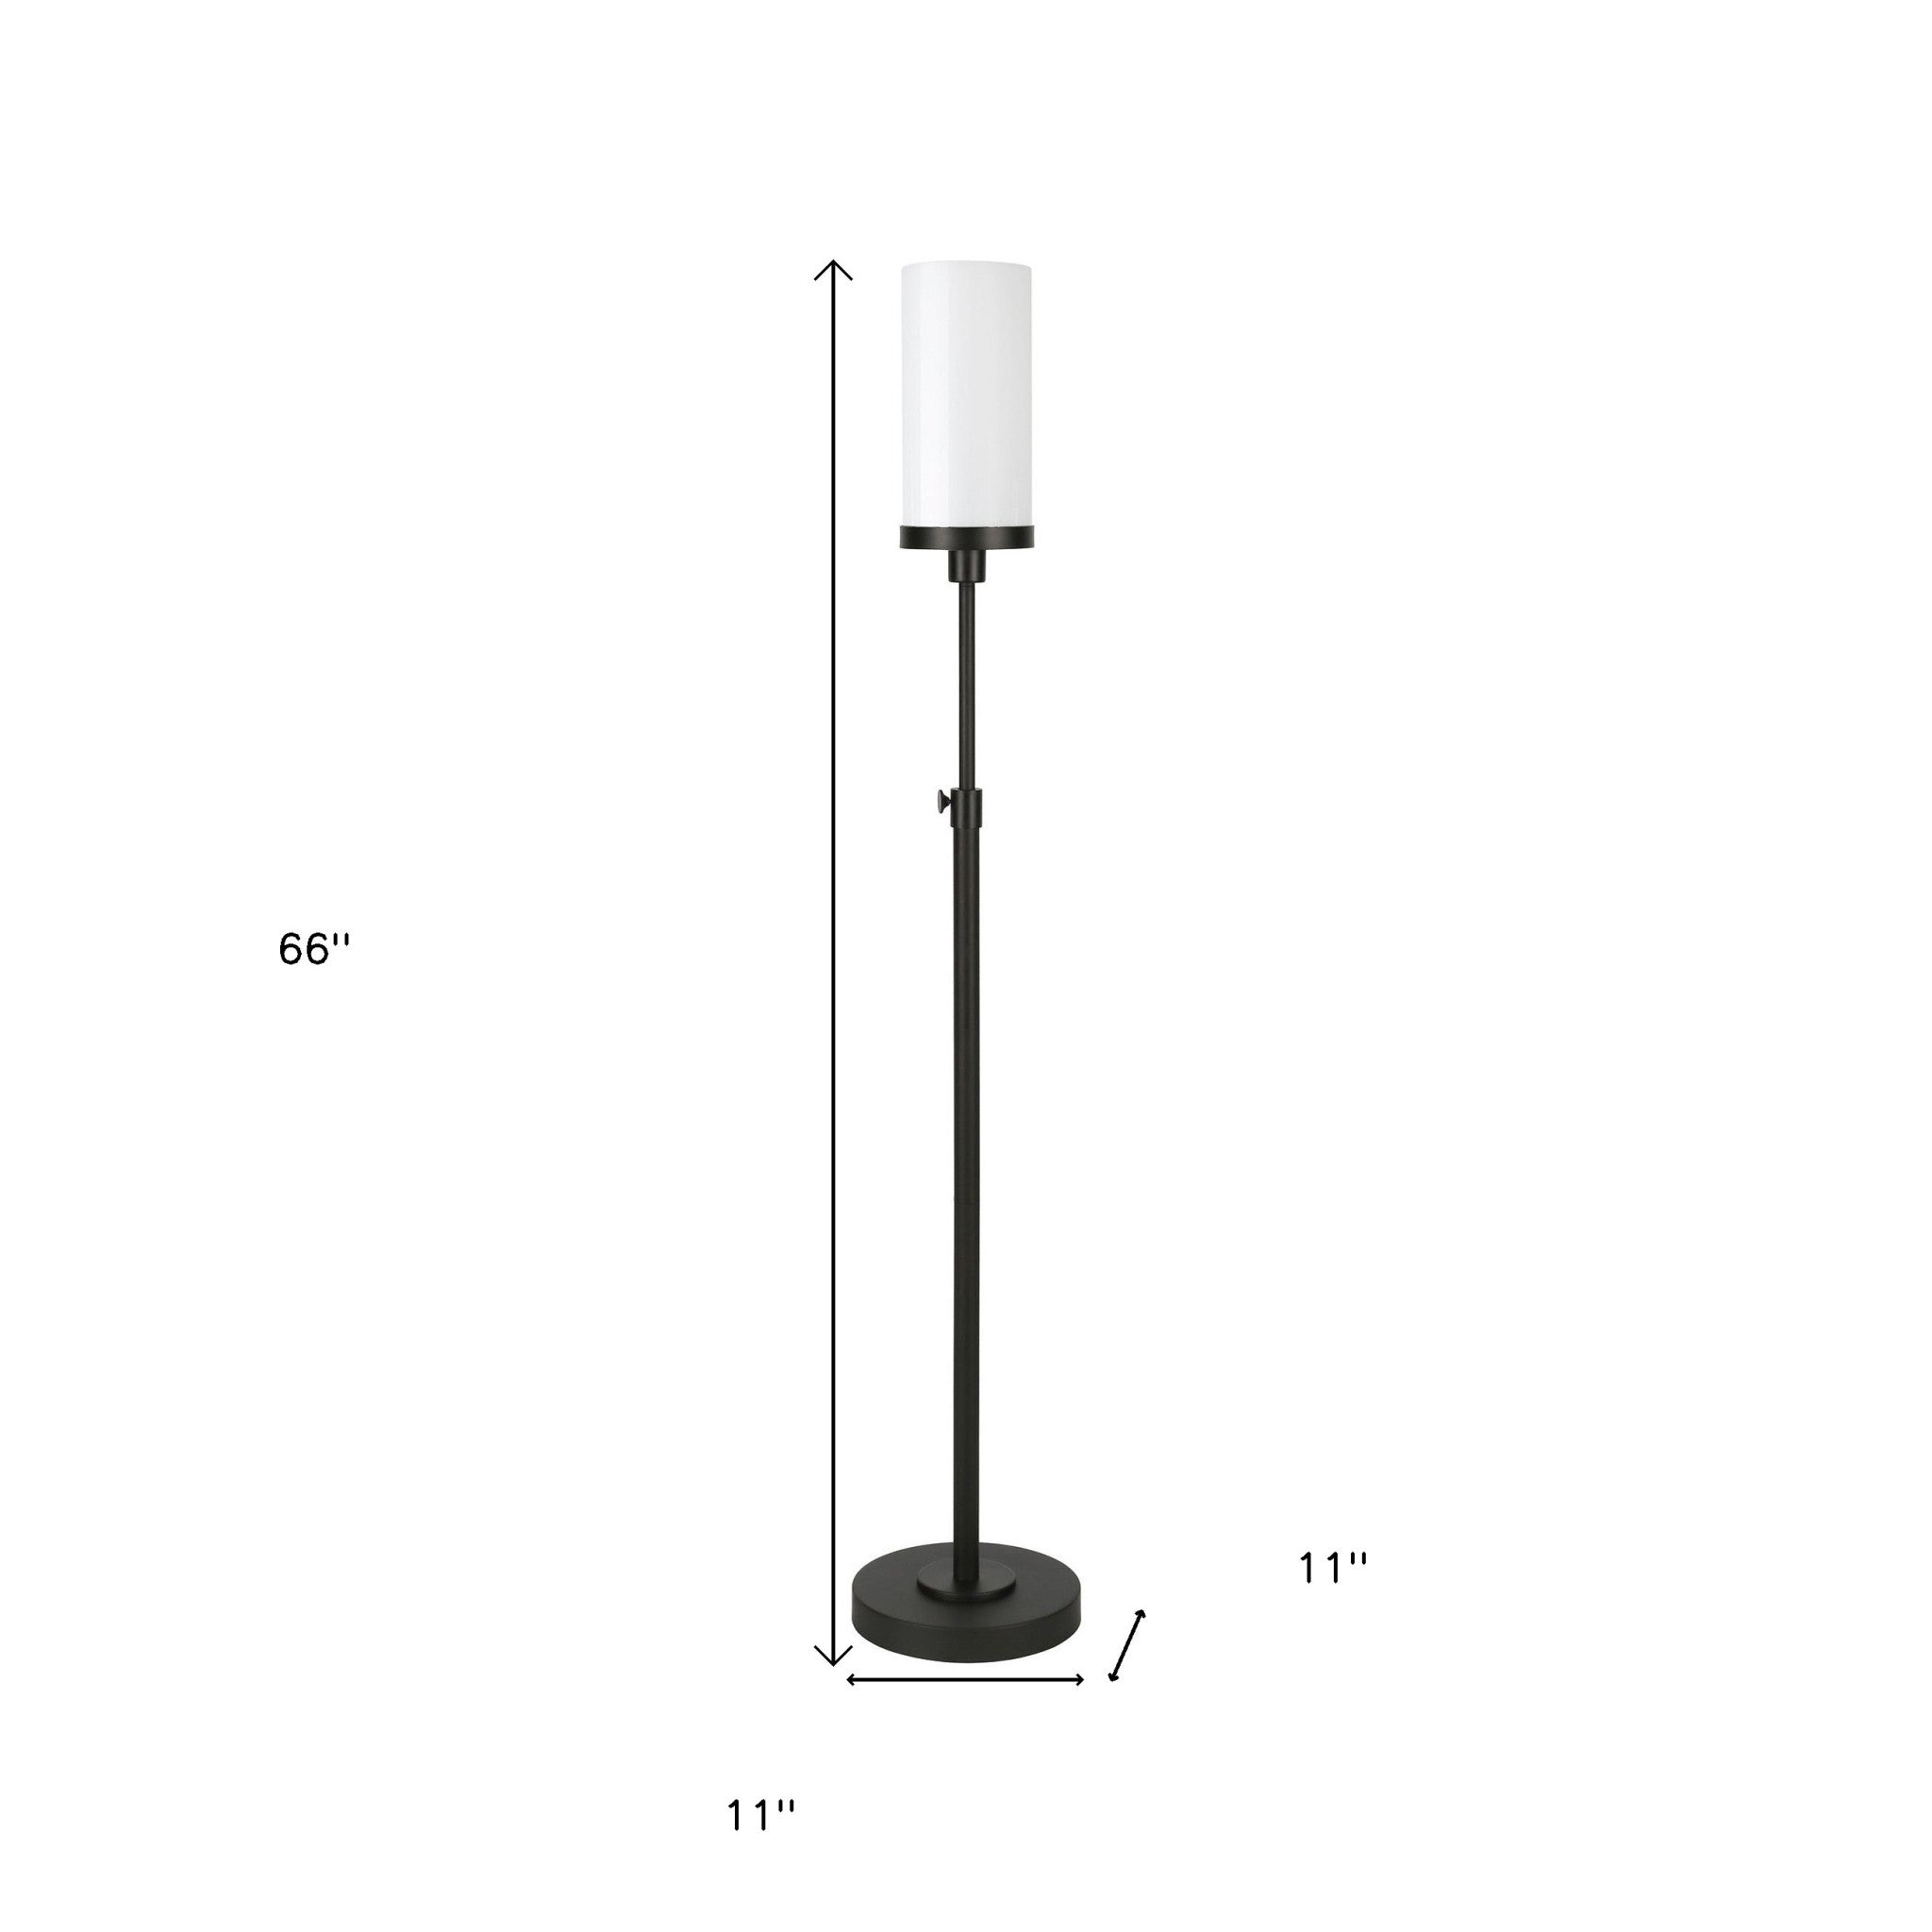 66" Black Torchiere Floor Lamp With White Frosted Glass Drum Shade